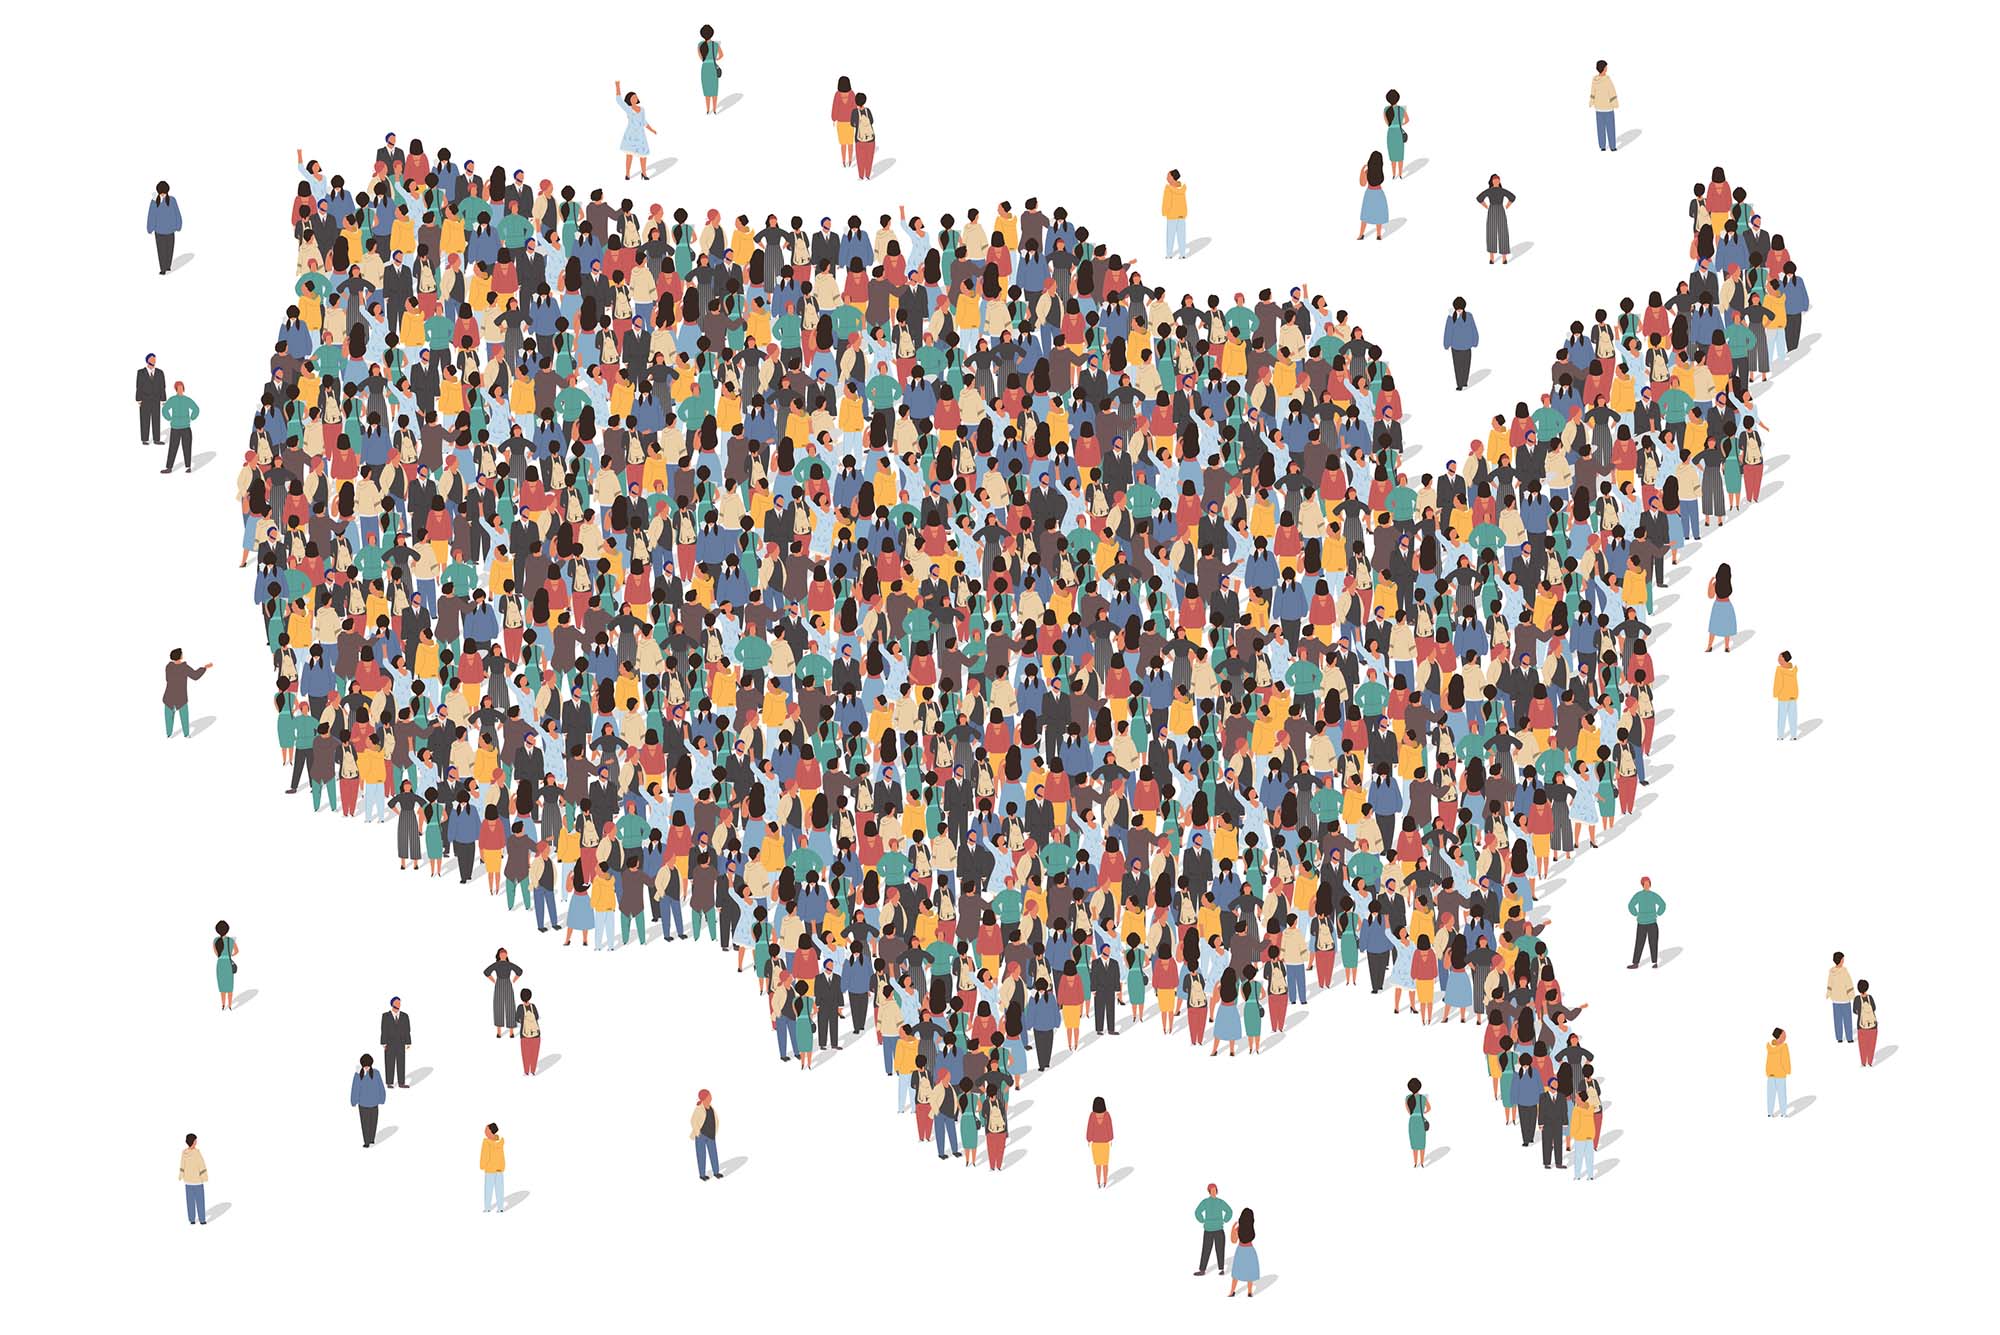 Image: Vector isometric illustration of the USA map made up of many people in a large crowd shape. People are made up of various colors and a few stragglers are seen outside the shape here and there.